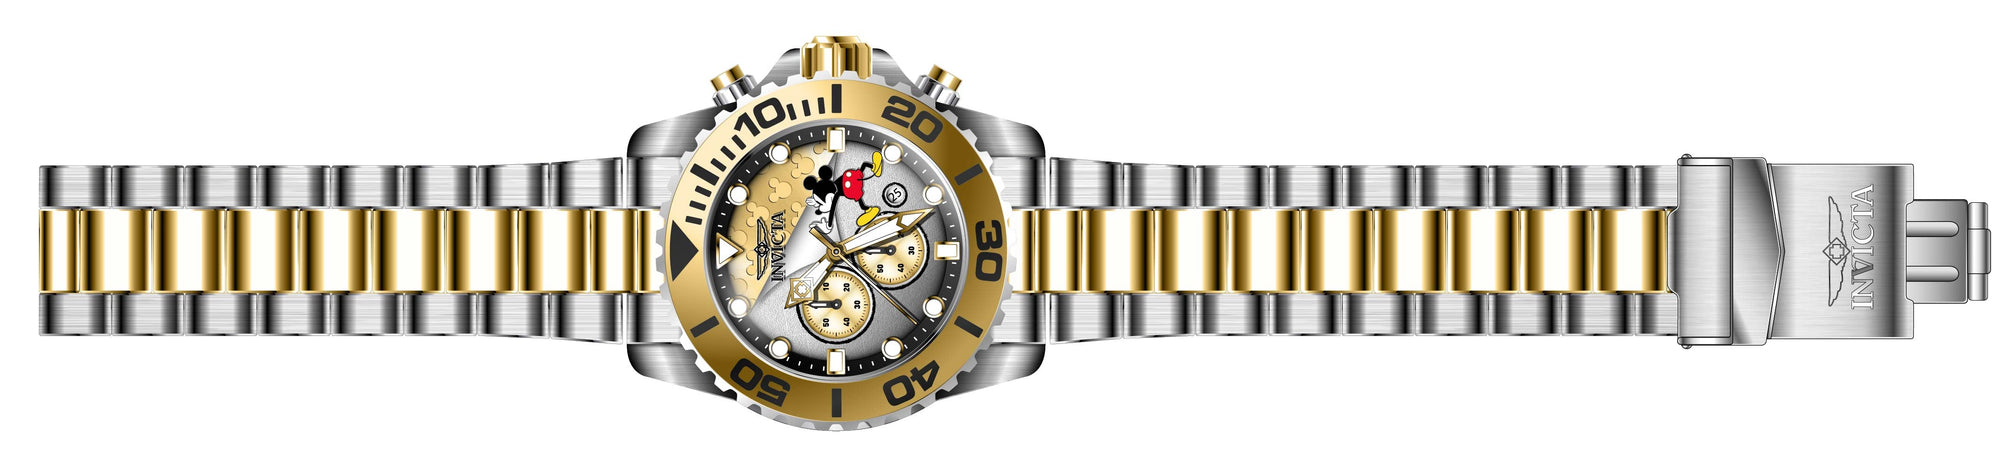 Band for Invicta Disney Limited Edition Mickey Mouse Men 32445